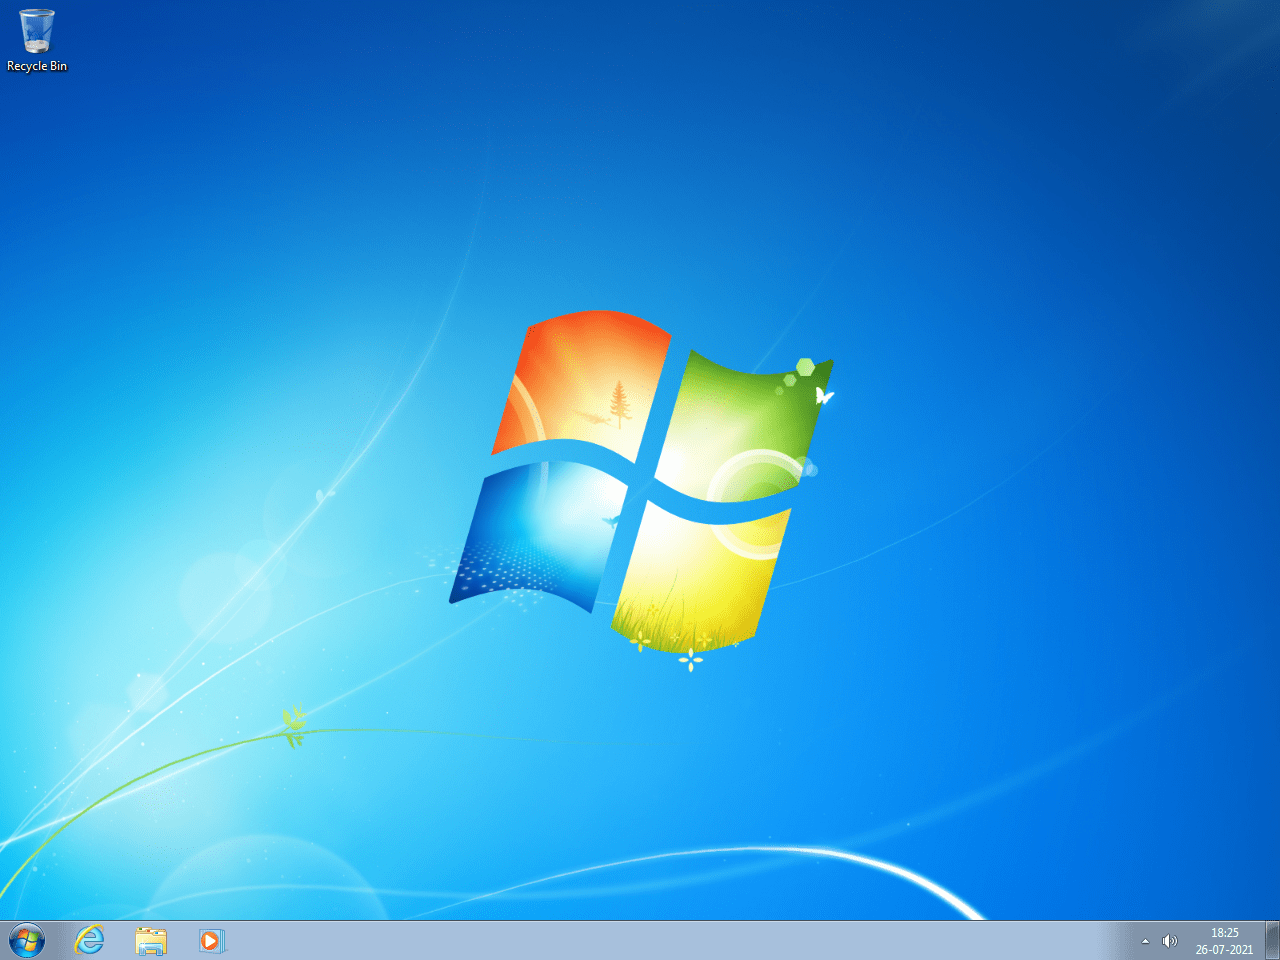 64 bit free download for windows 7 ultimate